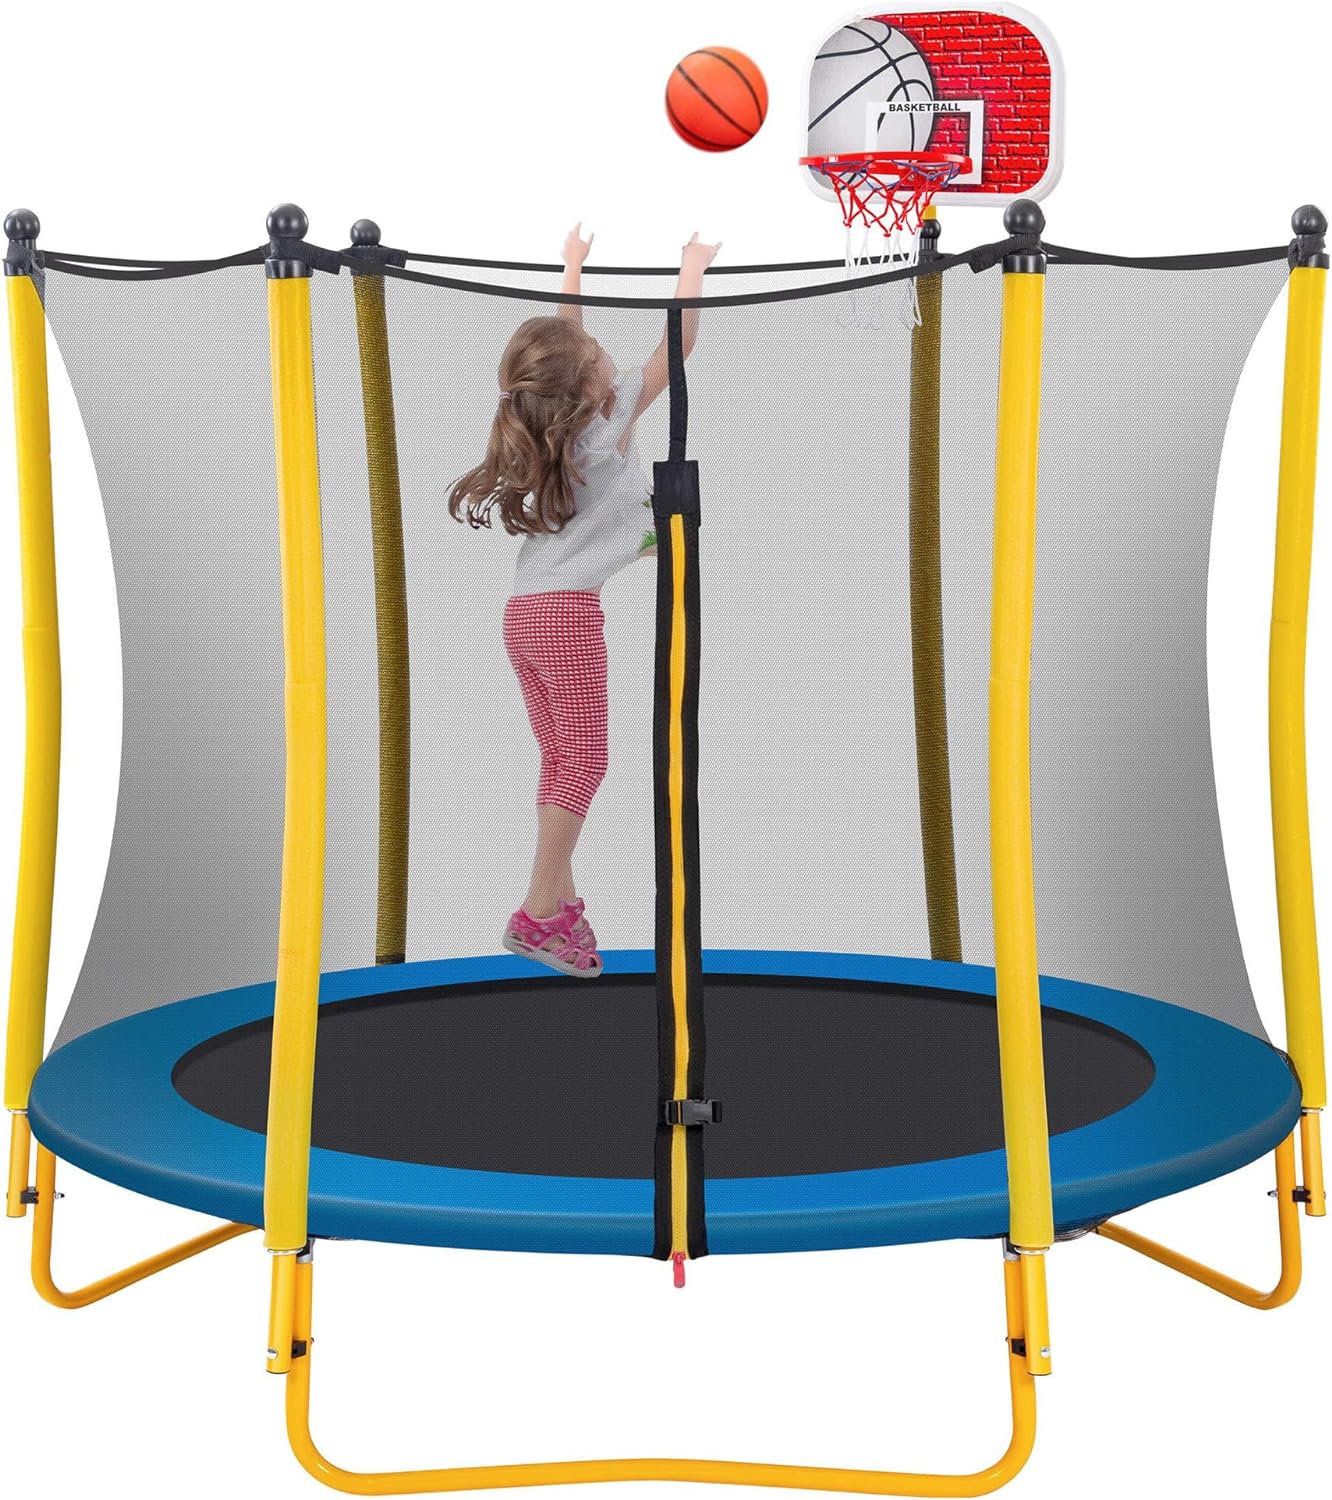 Trampoline for Kids with Basketball Hoop, Rubber Ball and Safety Enclosure Net